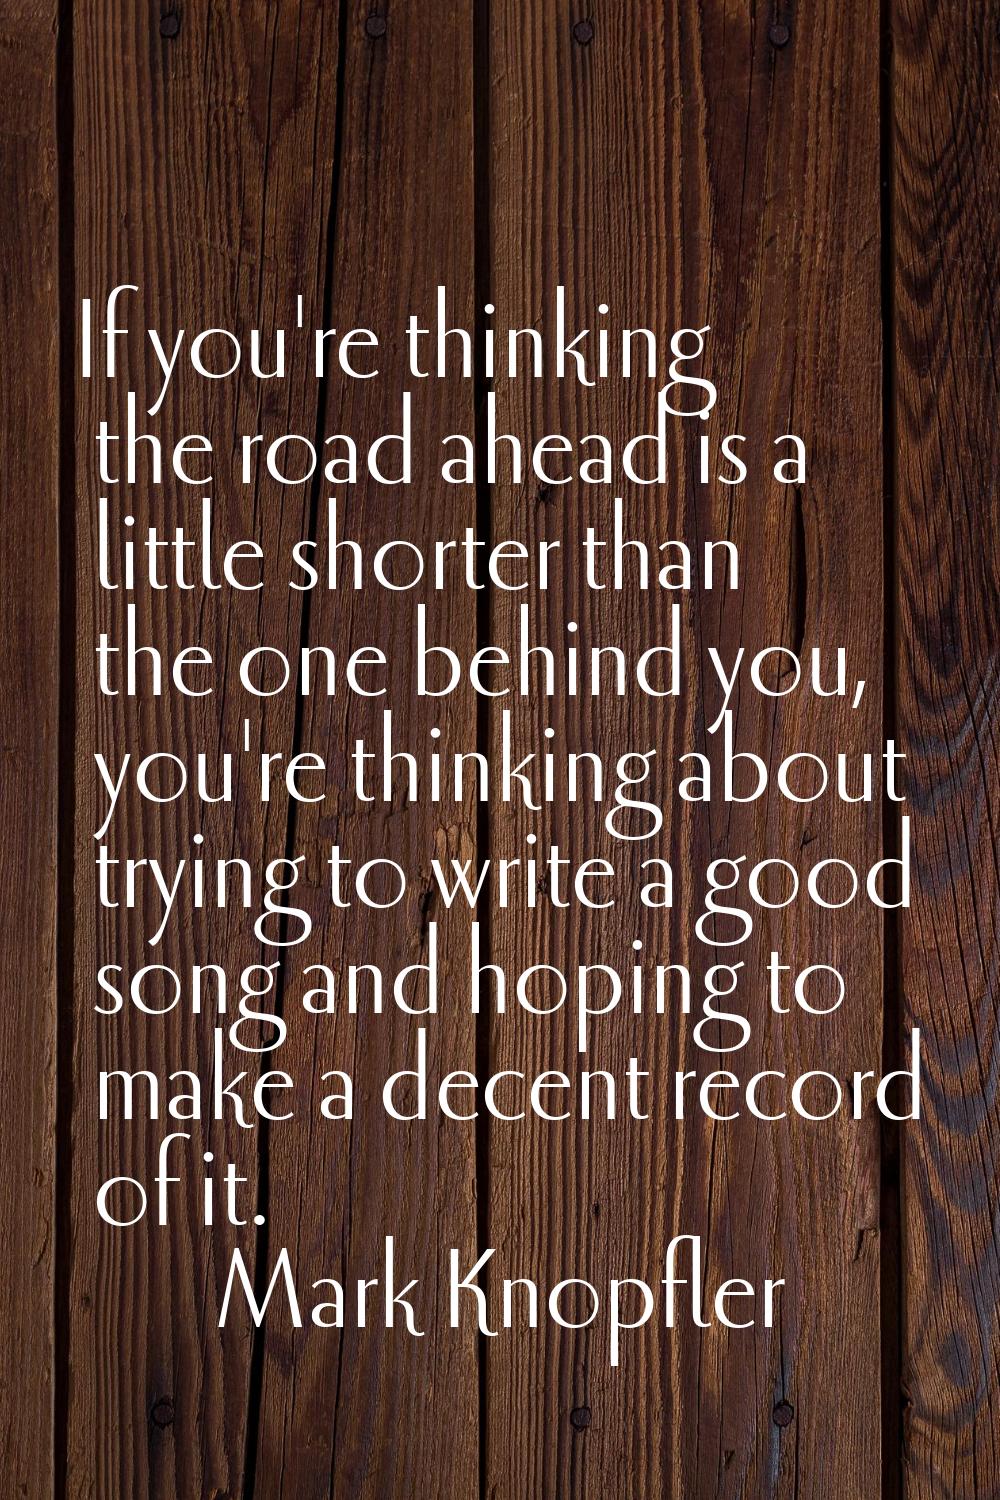 If you're thinking the road ahead is a little shorter than the one behind you, you're thinking abou